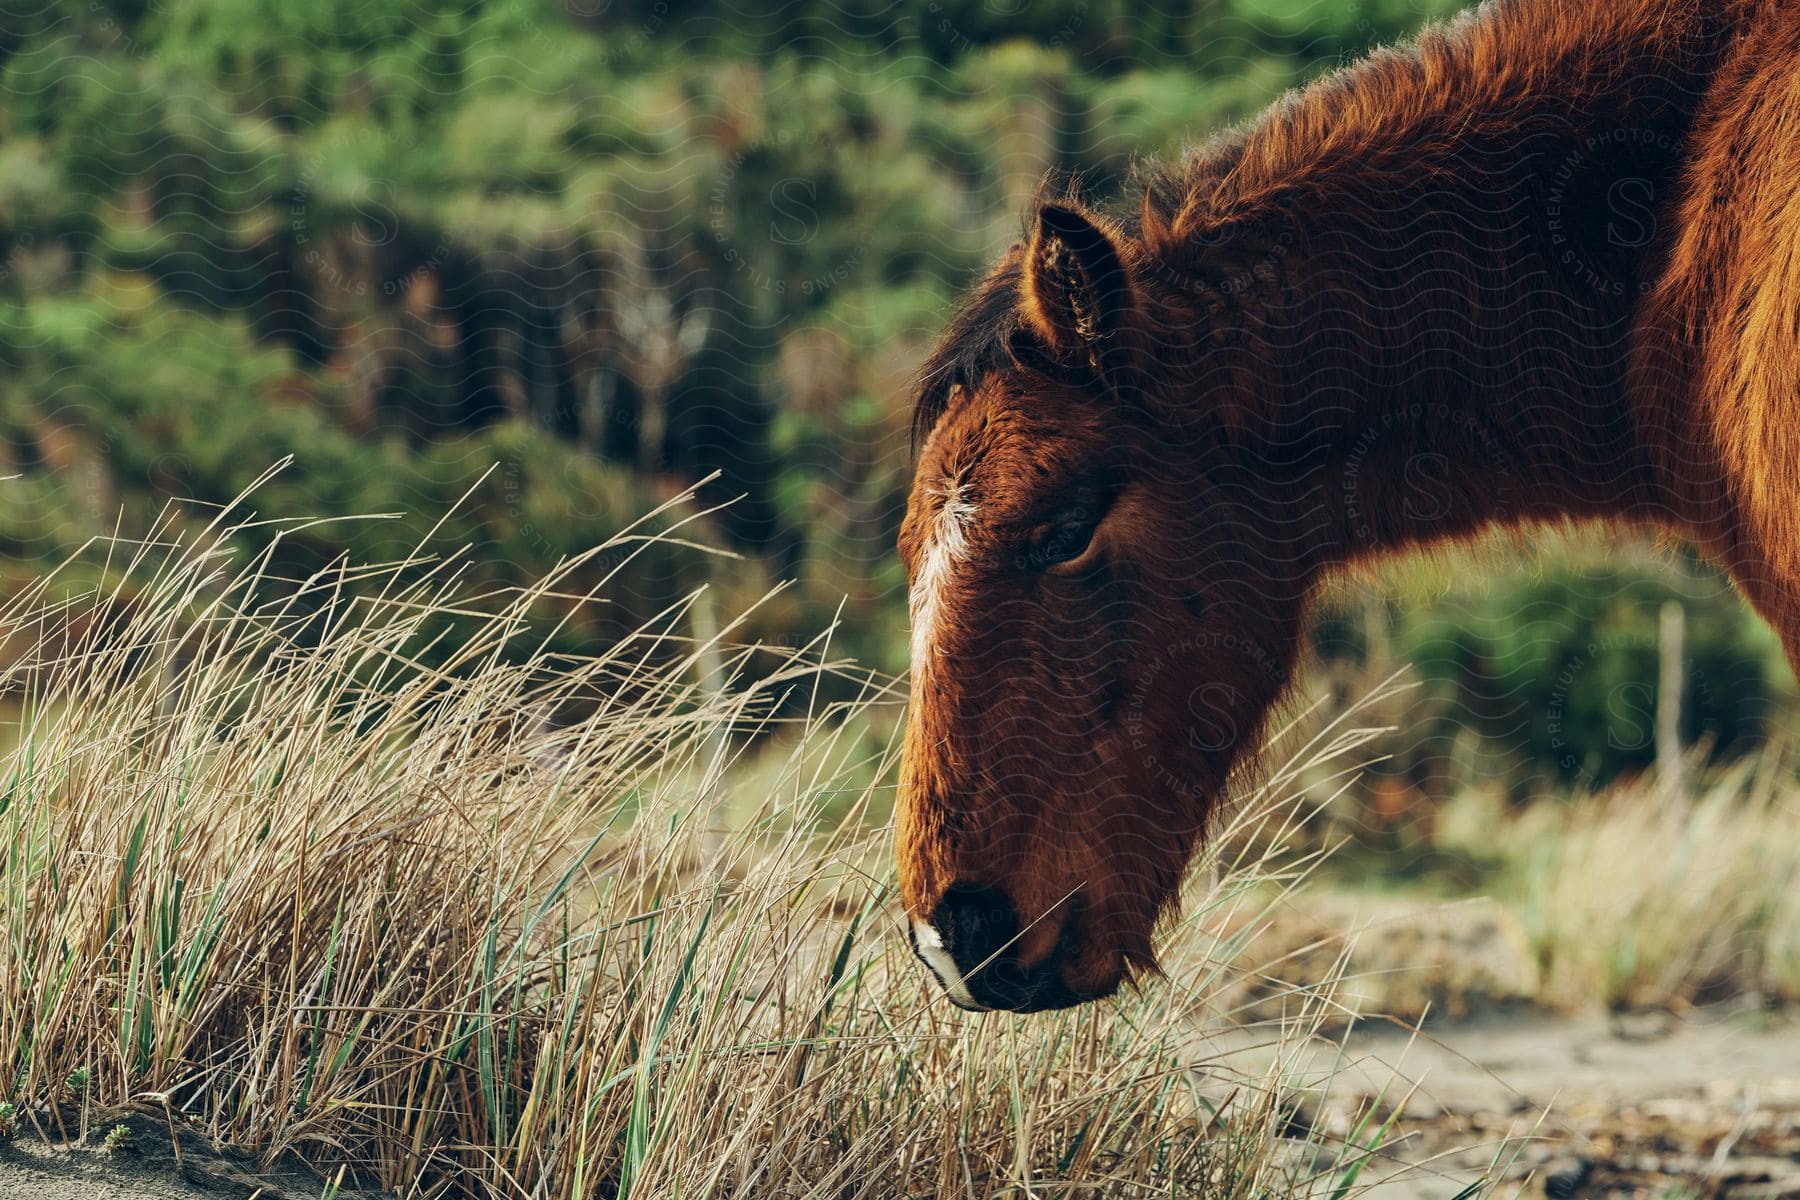 A horses face close up in a grass field